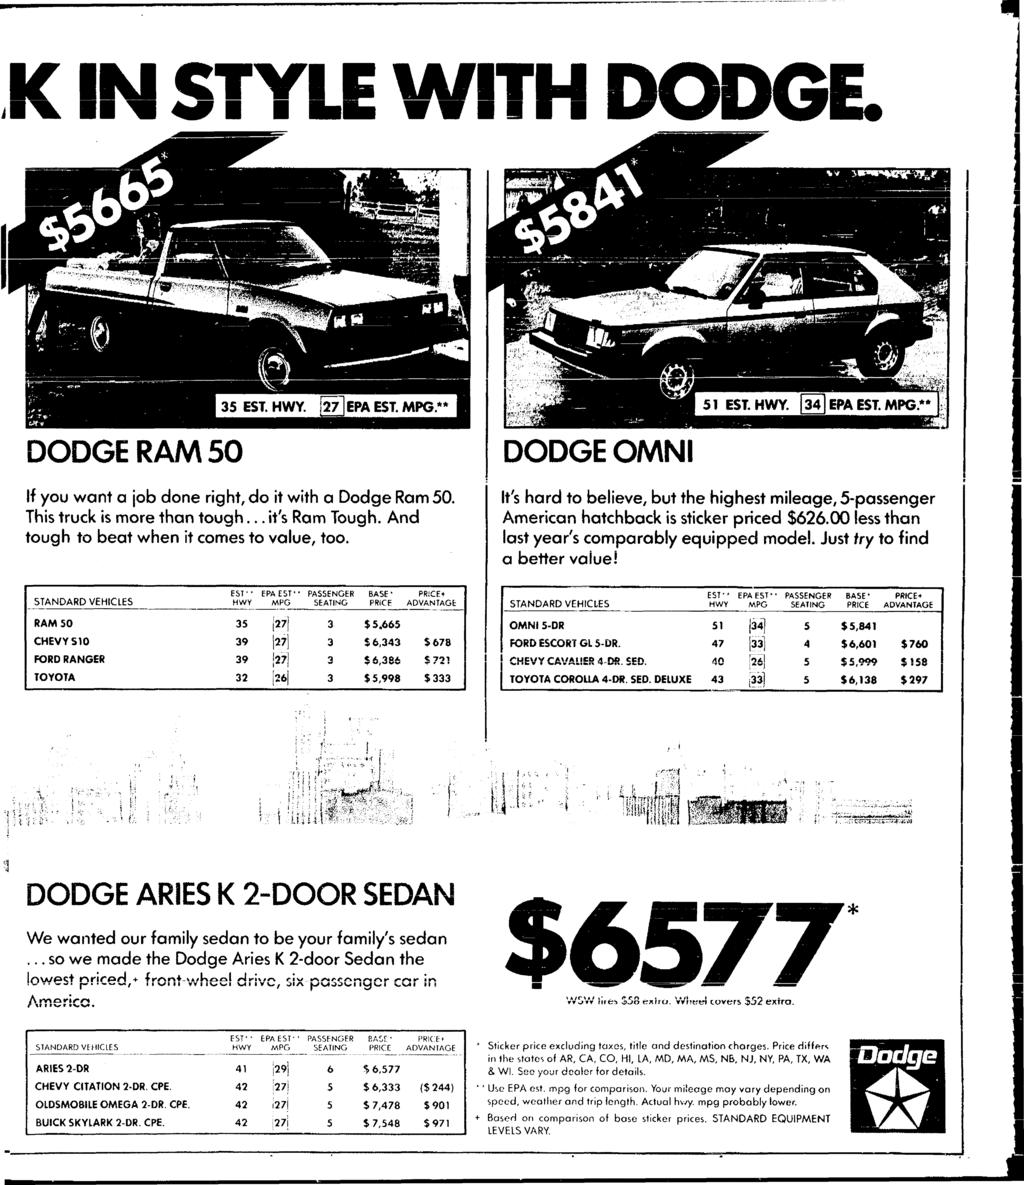 K N STYLE WTH DODGE RAM 50 f you want a job done rght, do t wth a Dodge Ram 50. Ths truck s more than tough... t's Ram Tough. And tough to beat when t comes to value, too.